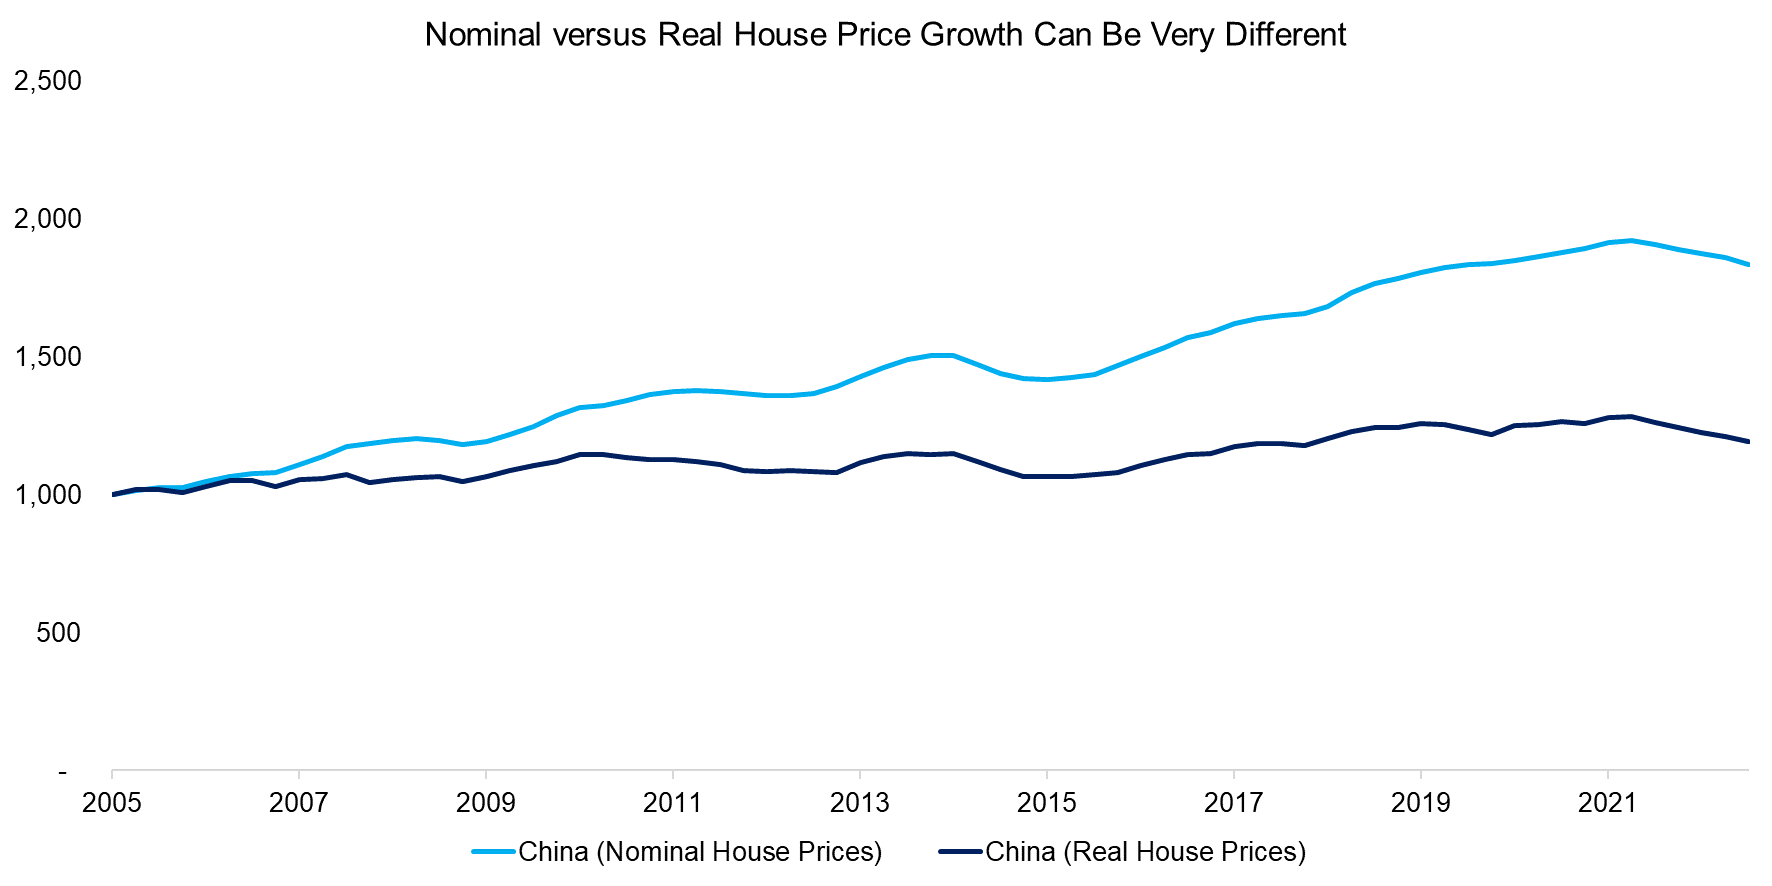 Nominal versus Real House Price Growth Can Be Very Different